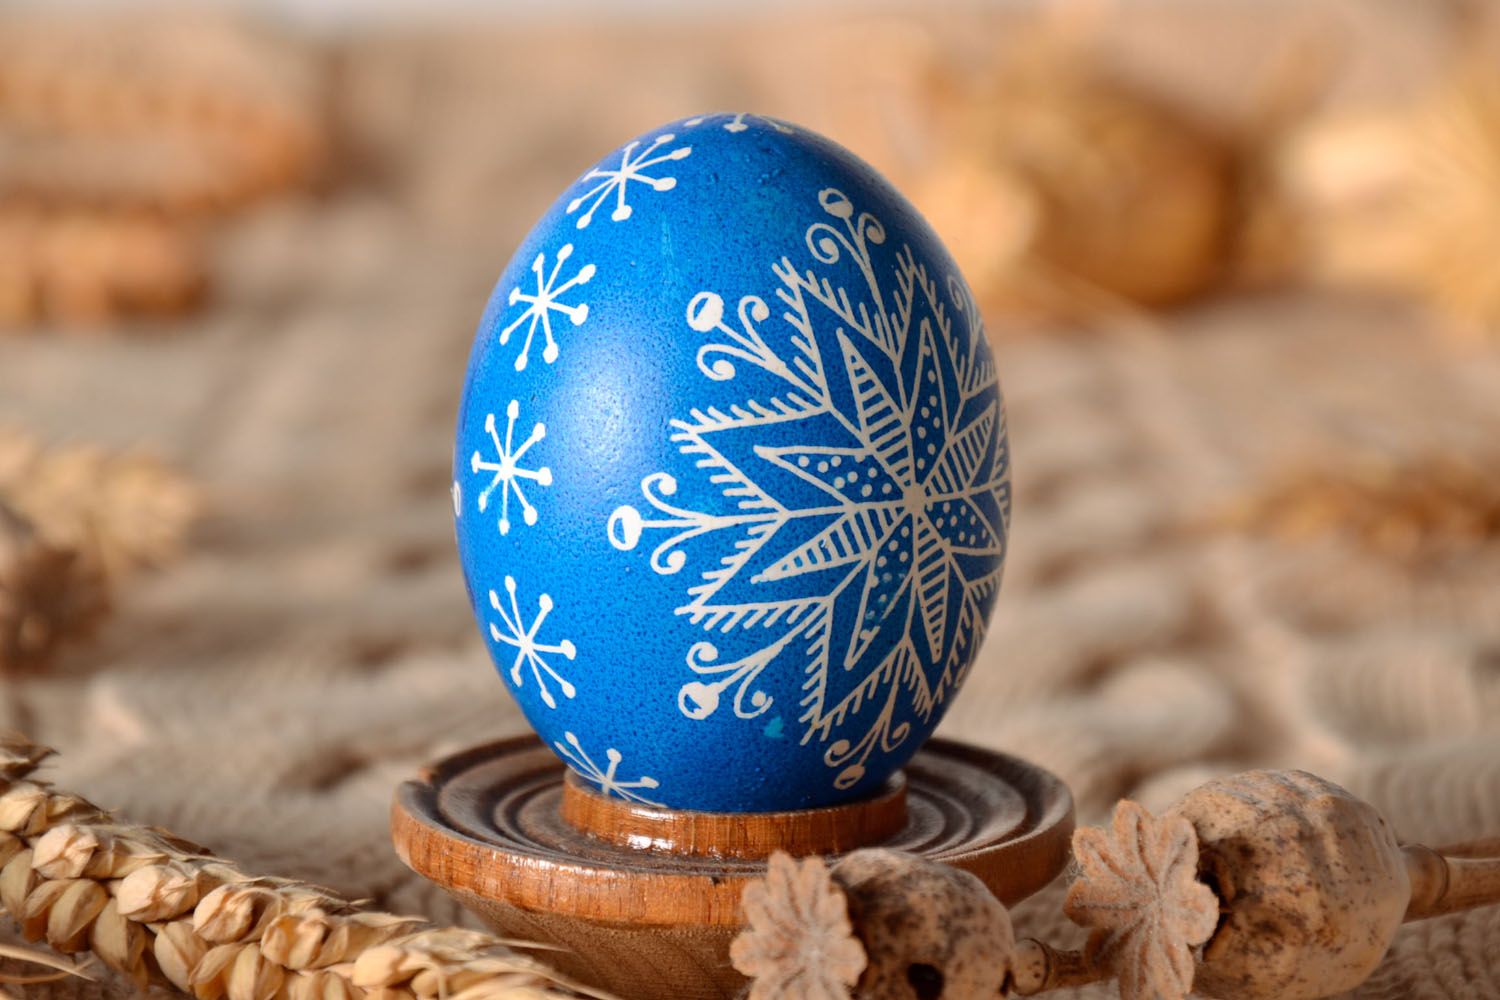 Homemade painted egg for New Year photo 1